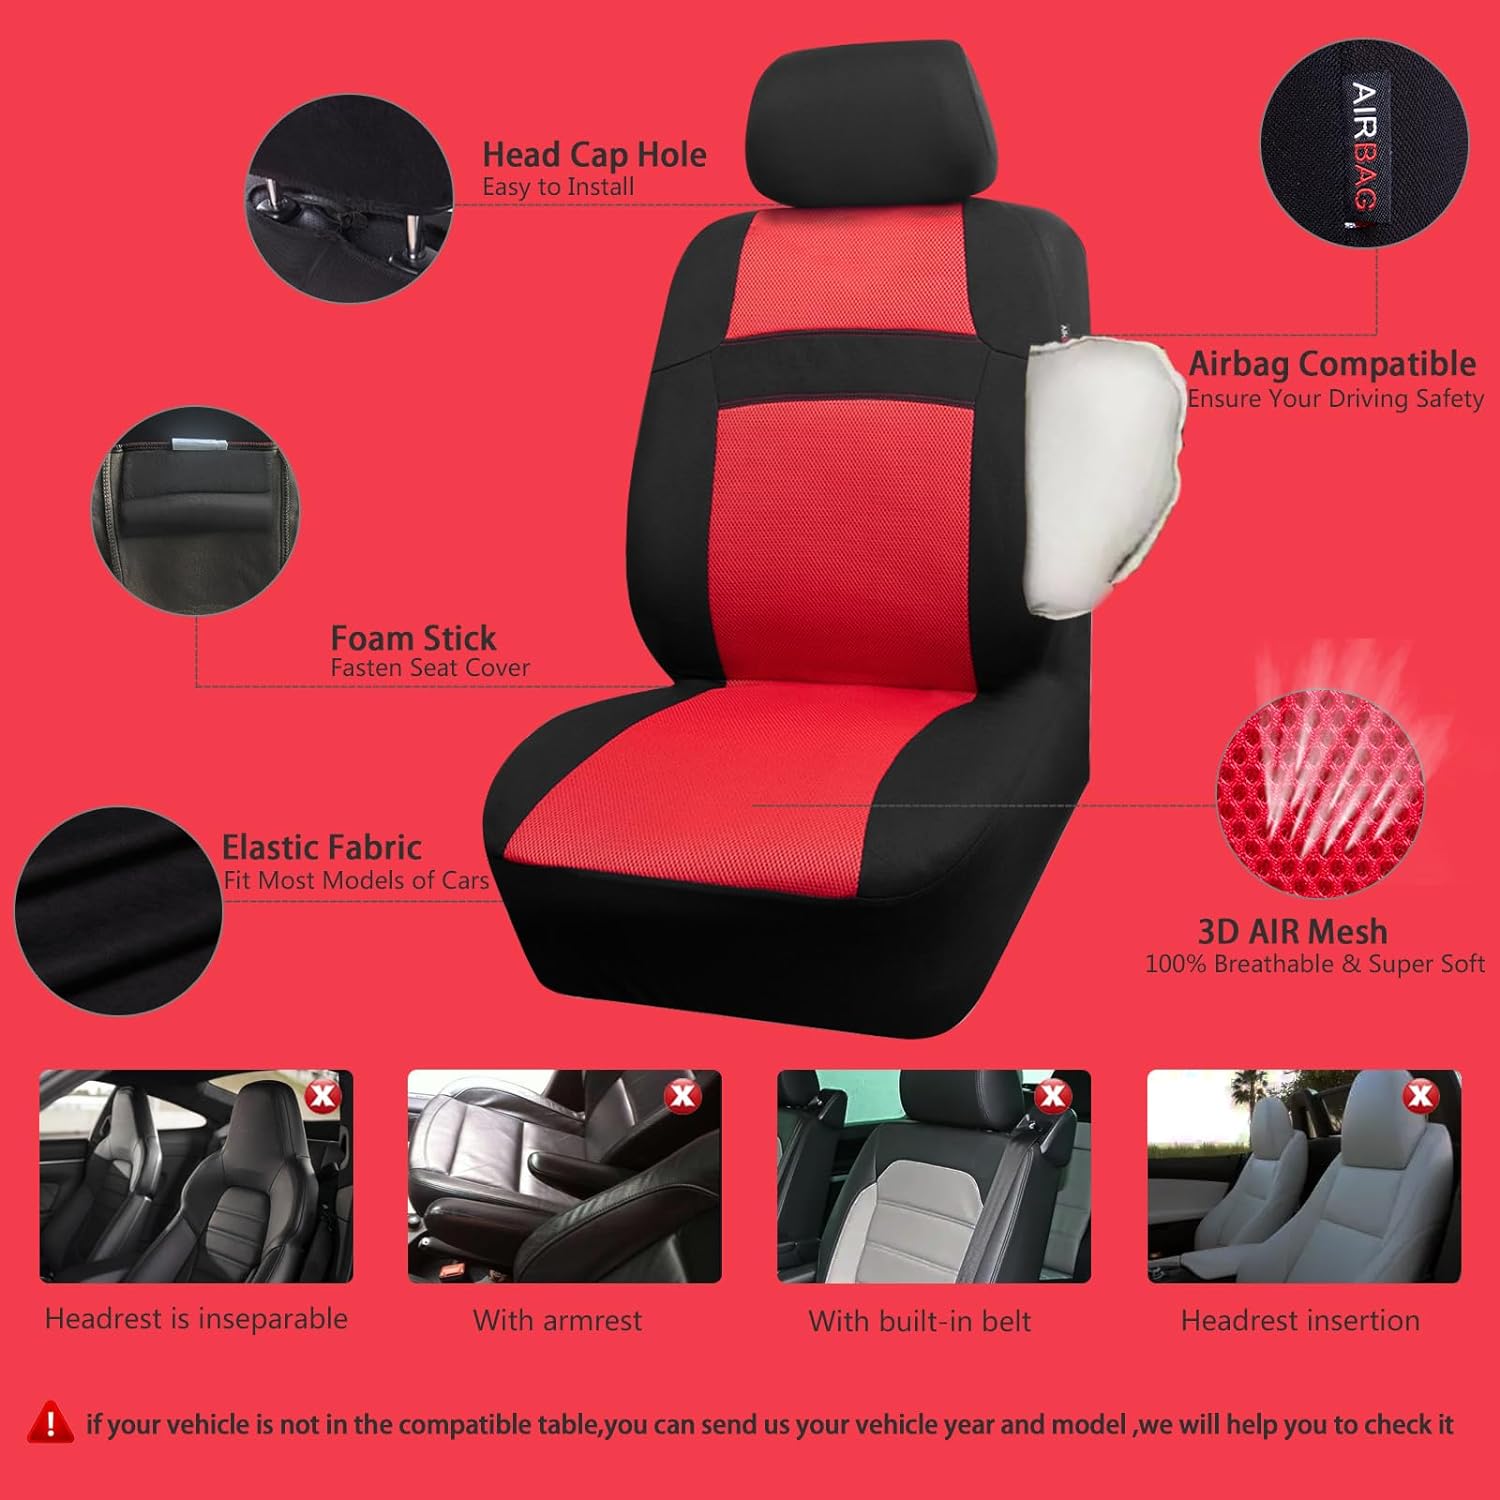 CAR PASS Universal Mesh Two Front Seat Covers & Car Floor mats,Steering Wheel Cover fits Most Cars, SUVs, Trucks, and Vans Airbag Compatible (Black and Red)